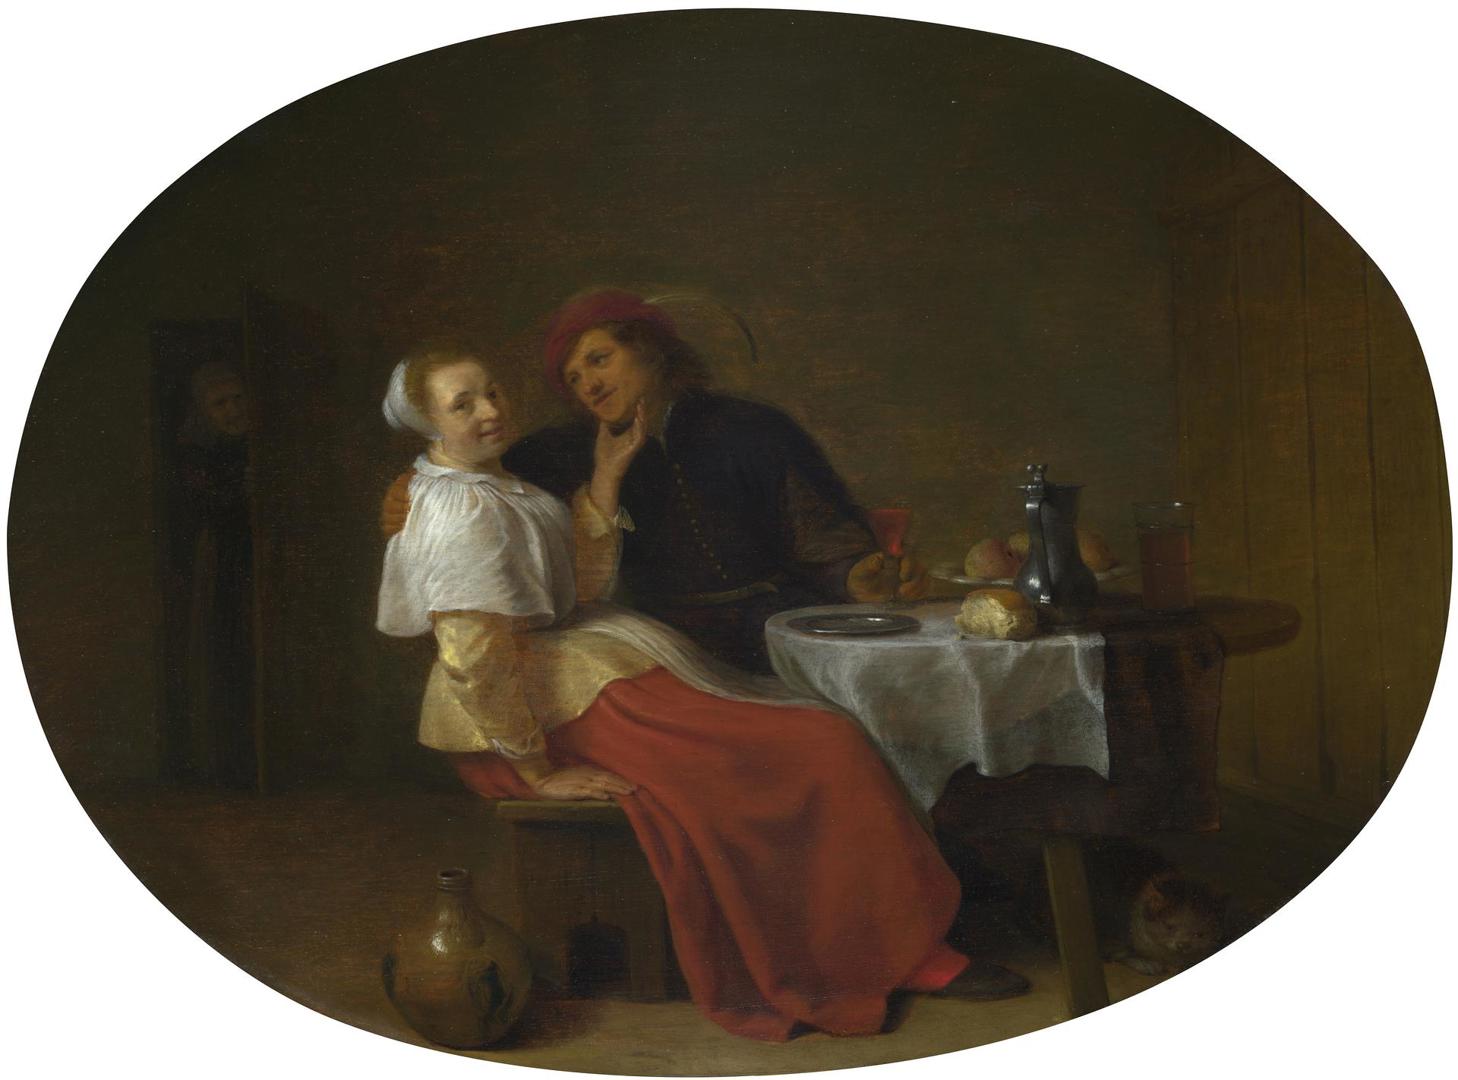 Two Lovers at Table by Hendrick Sorgh